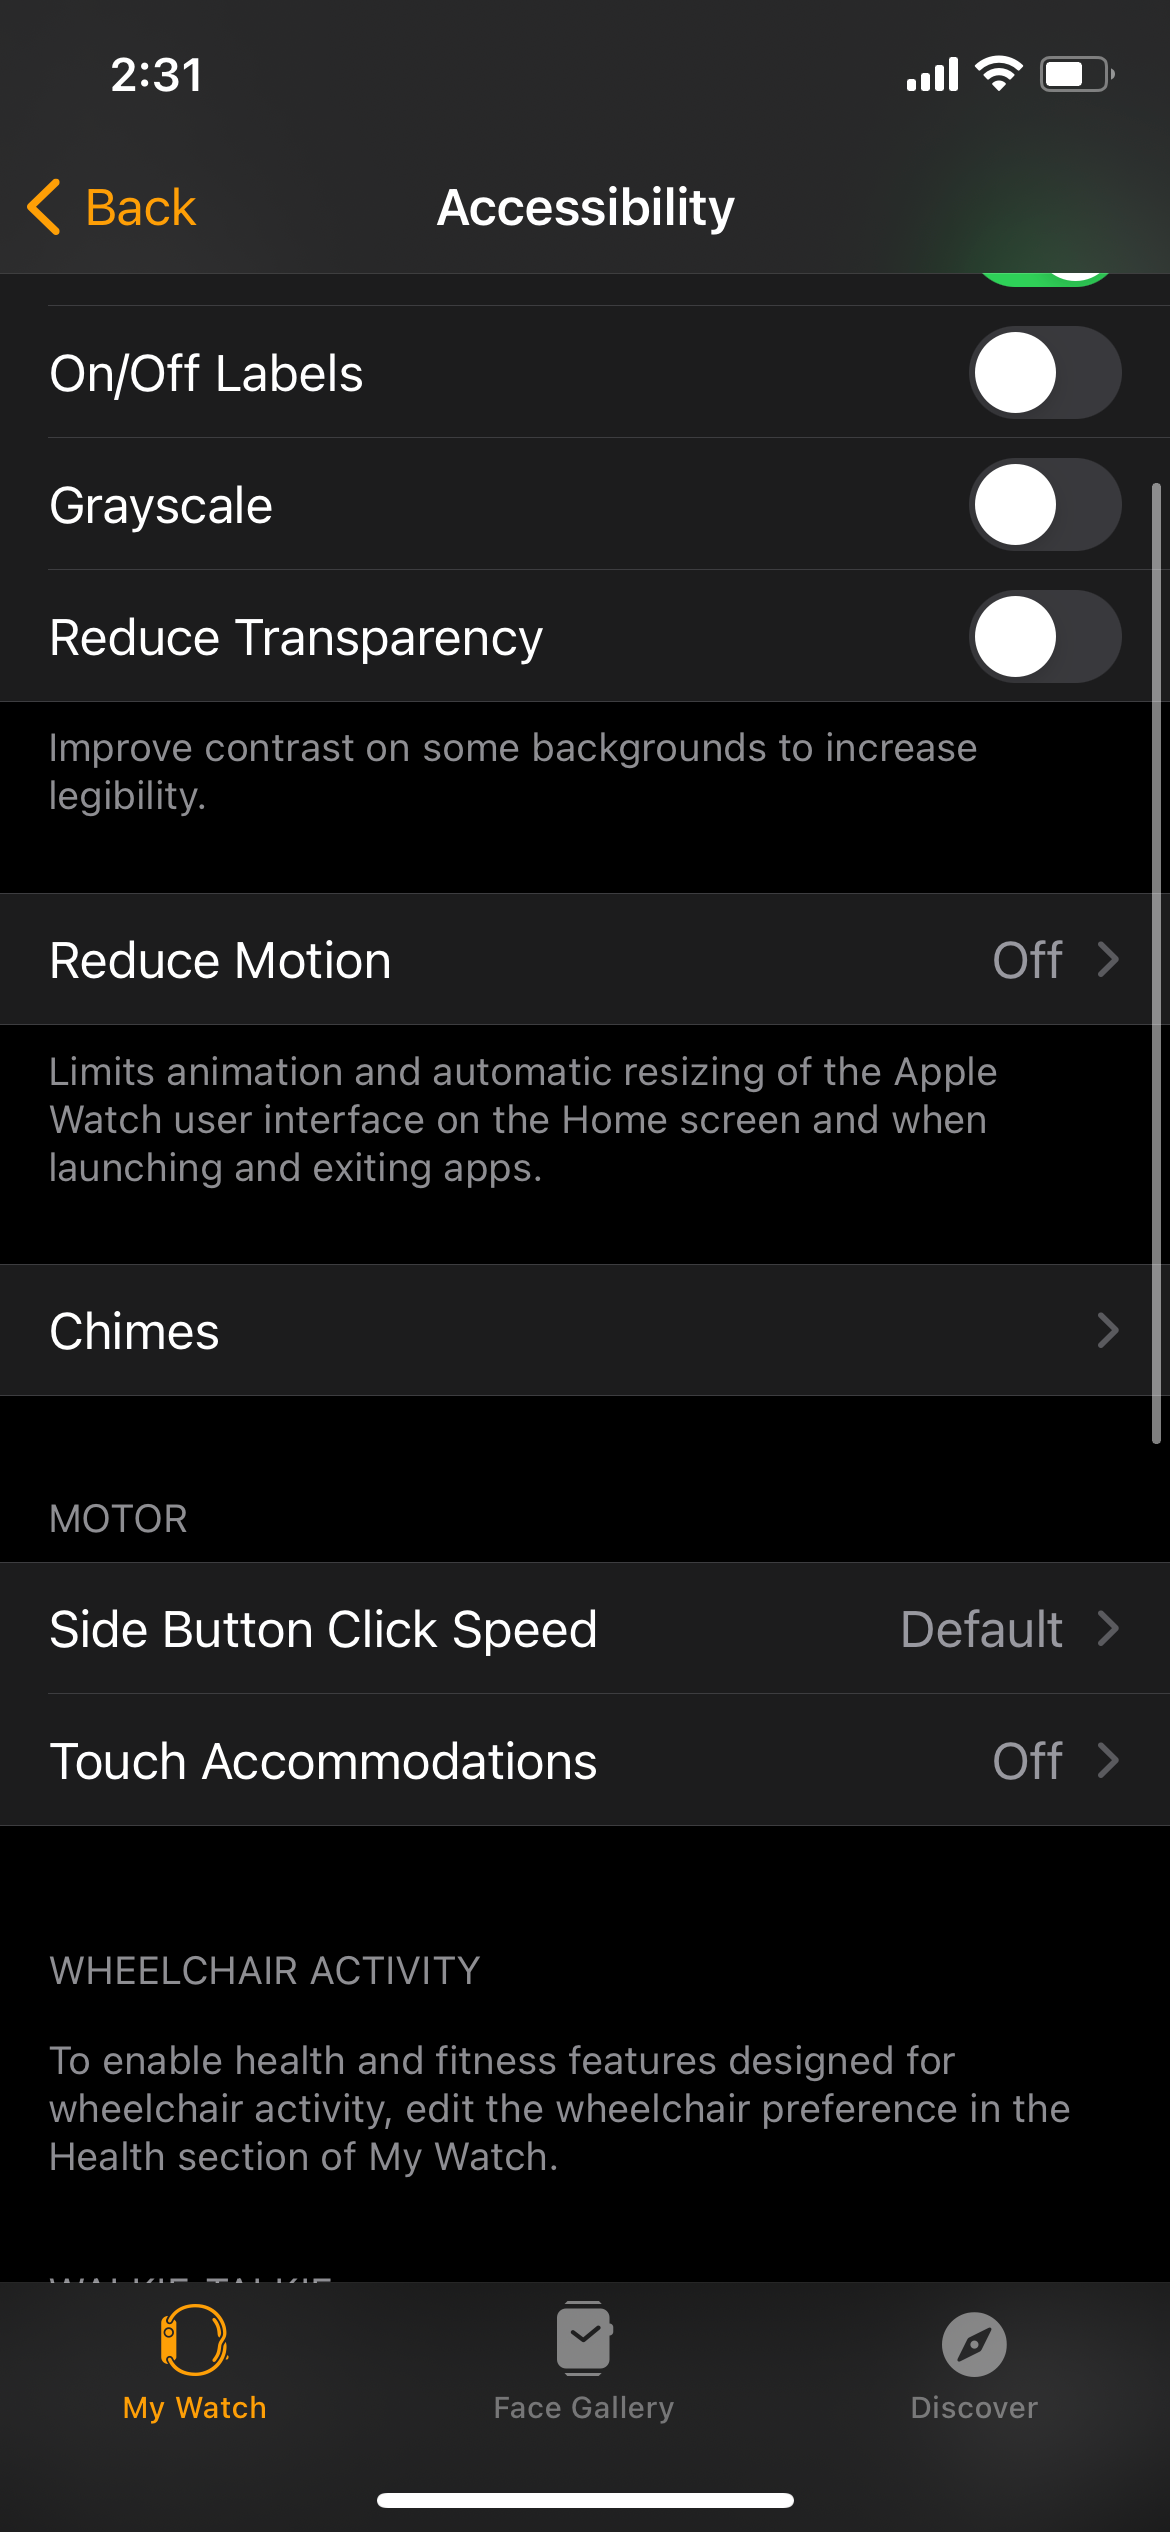 Reduce Motion settings on the Watch app on iPhone.